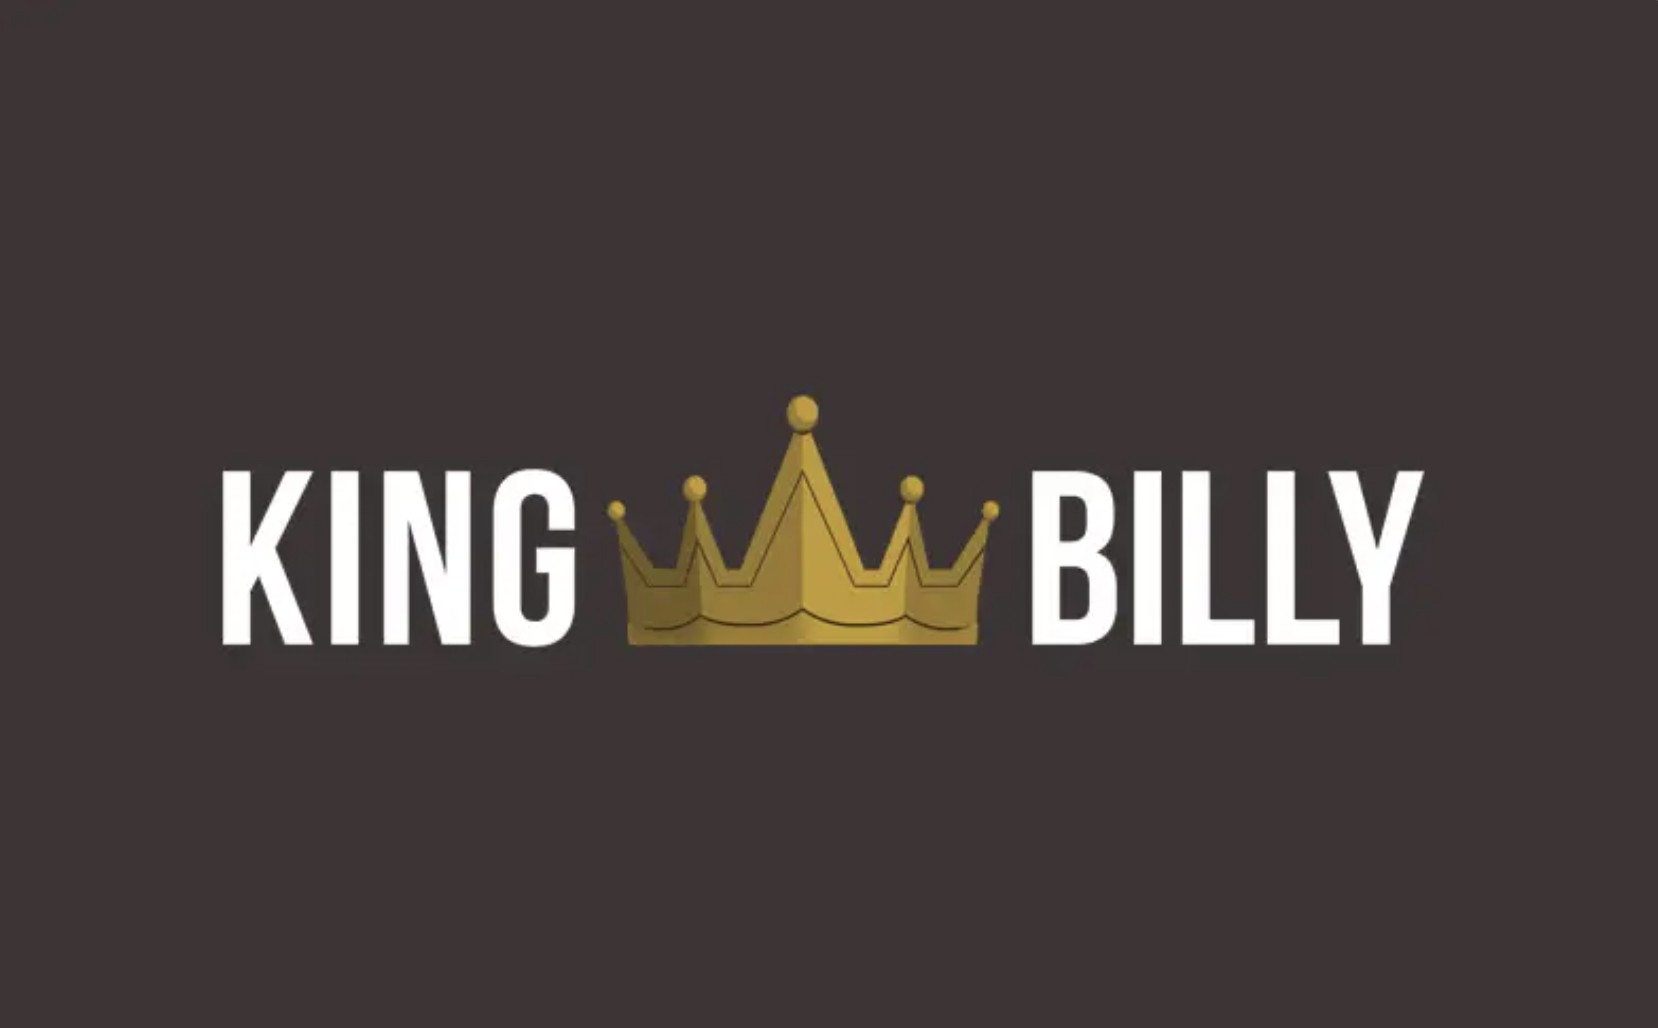 King Billy Casino logo against a vibrant background